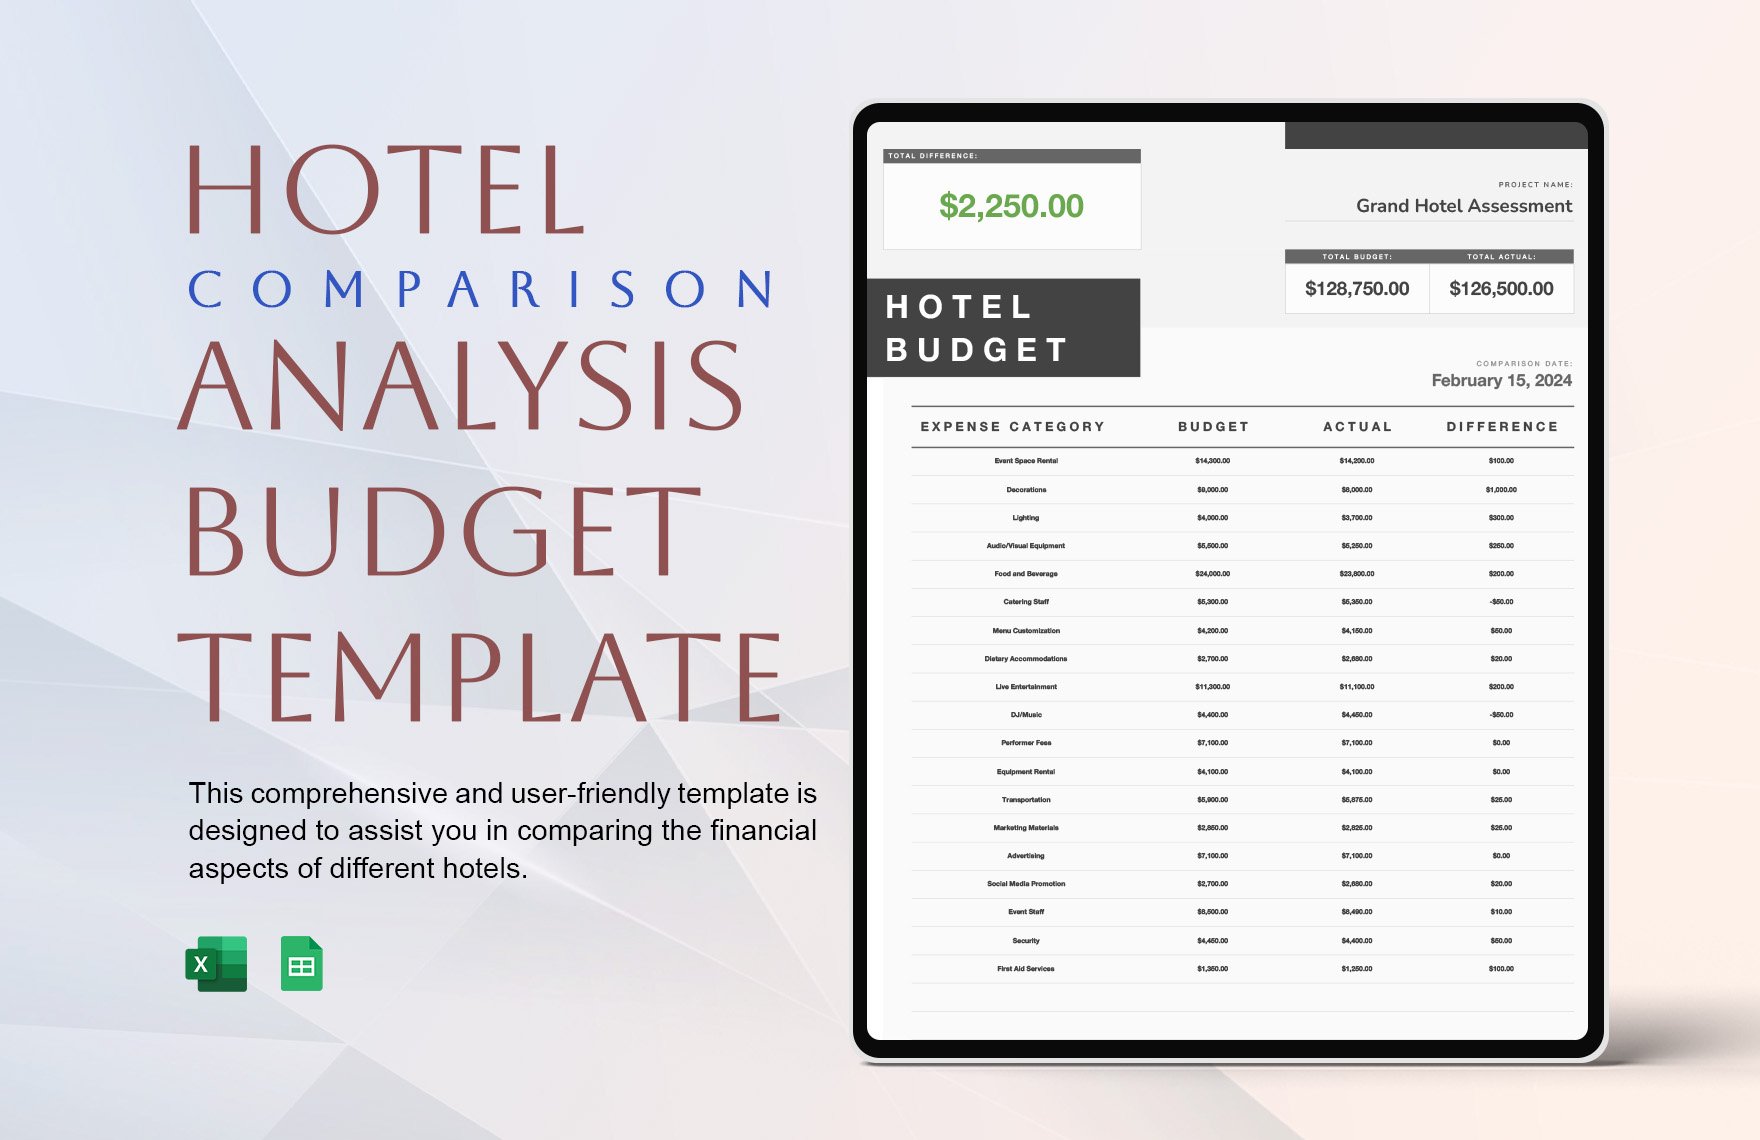 Hotel Comparison Analysis Budget Template